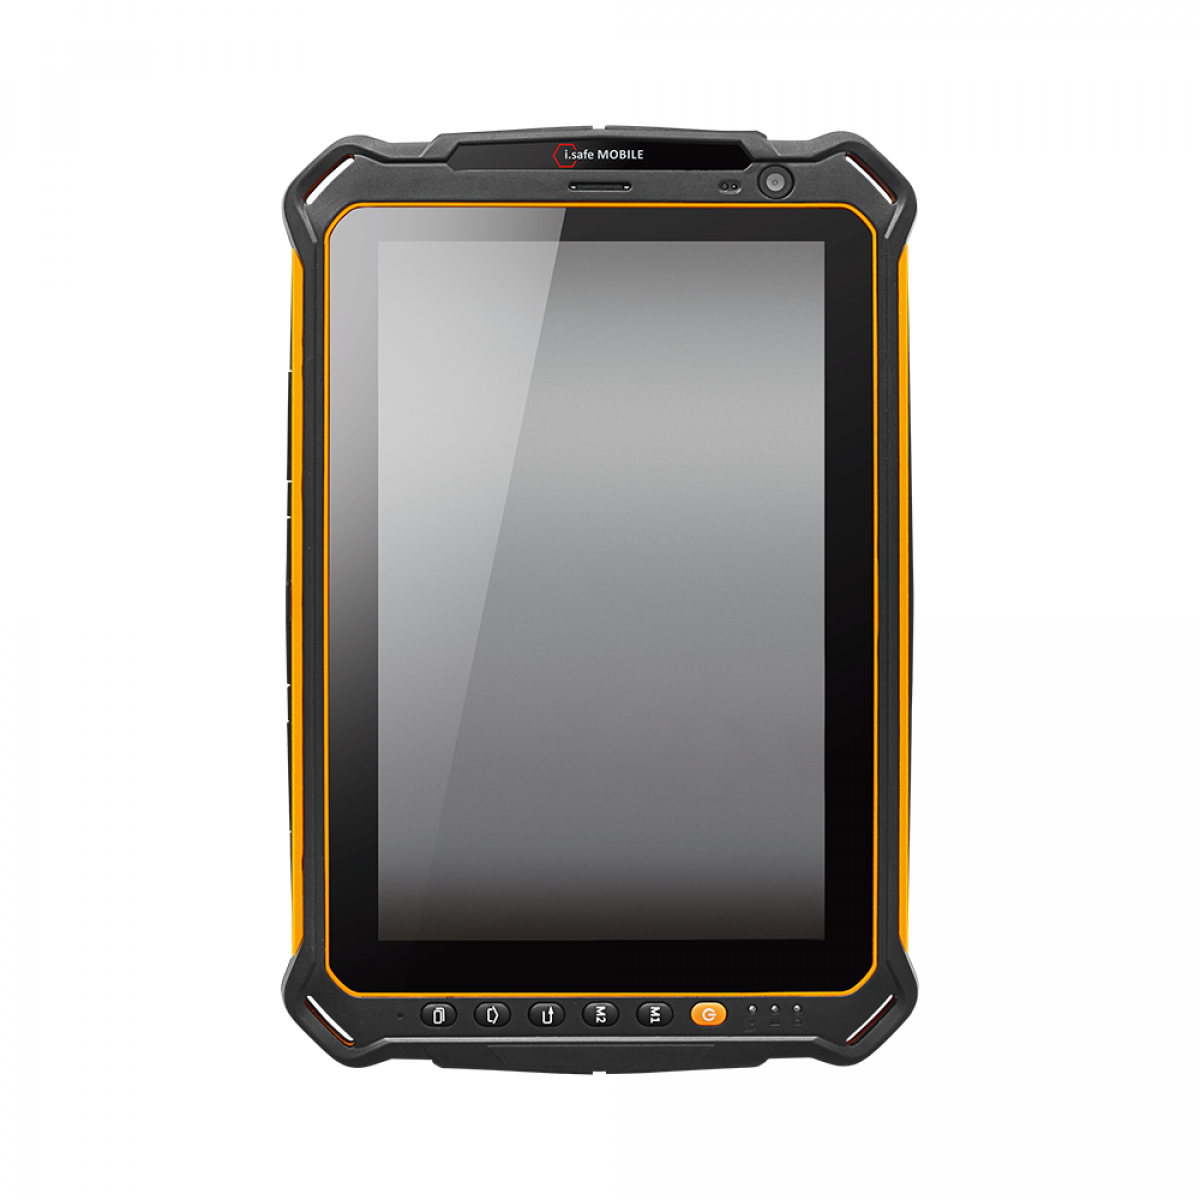 i.safe-Mobile IS930.1 Tablet for hazardous environments